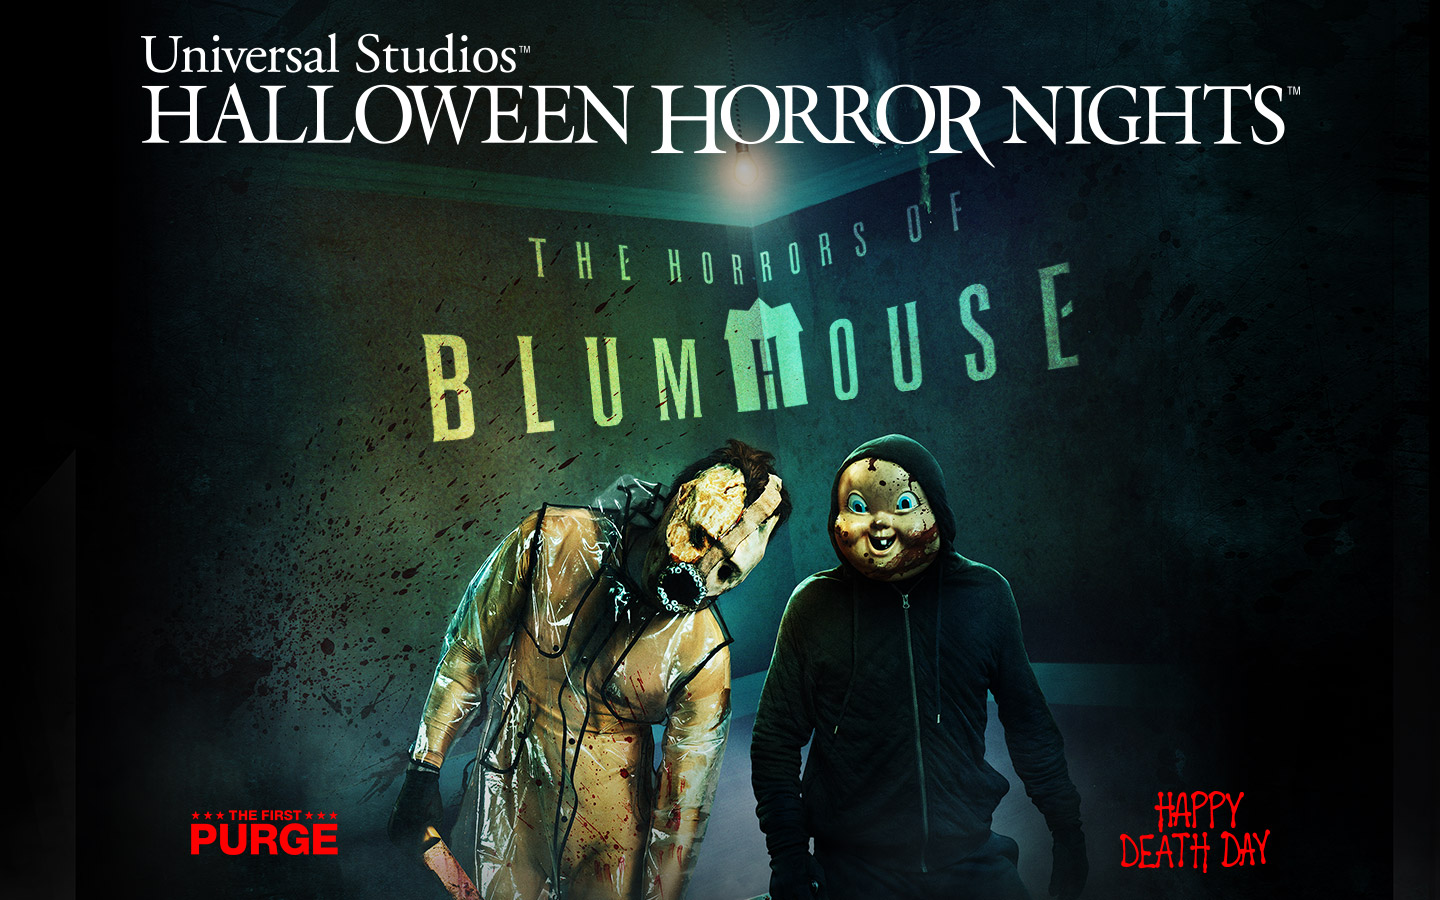 The Horrors of Blumhouse Returns to Halloween Horror Nights180820 140422